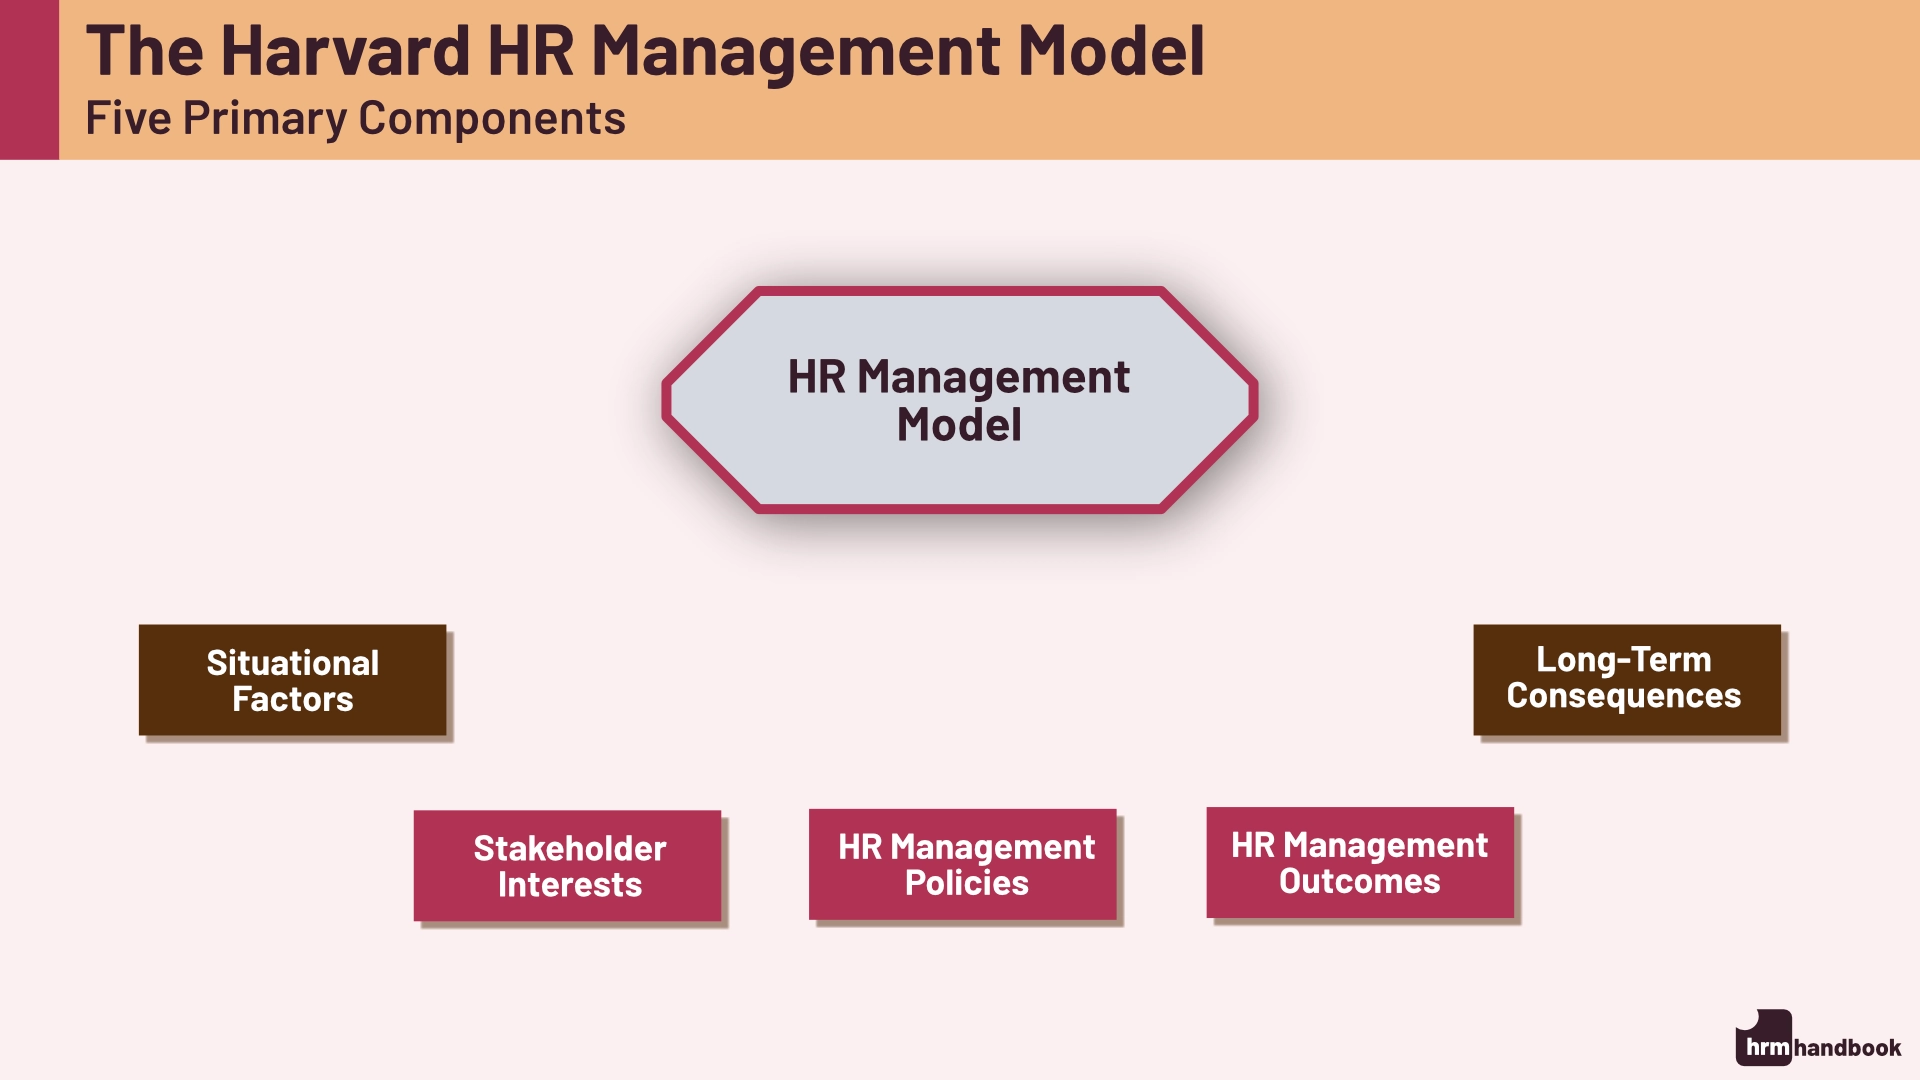 Harvard HR Model and its components